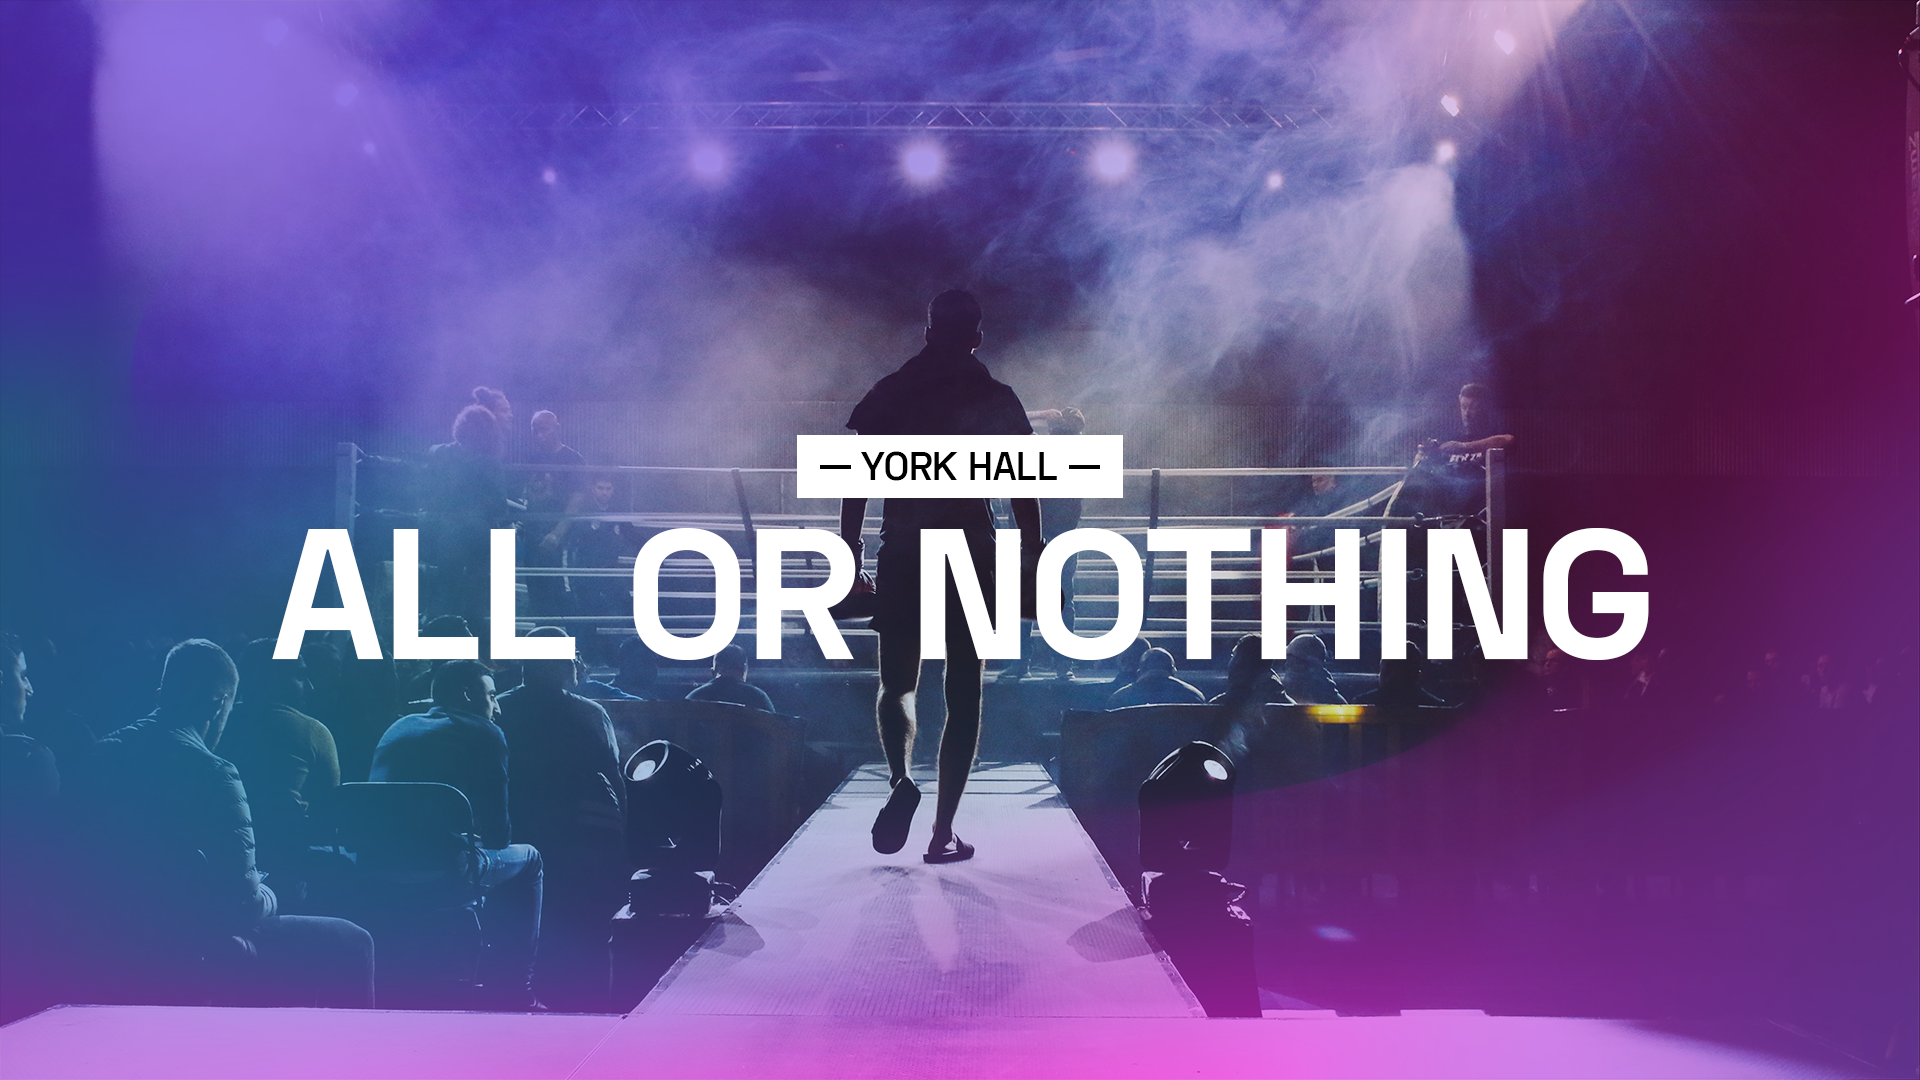 All or Nothing - Live Boxing at York Hall